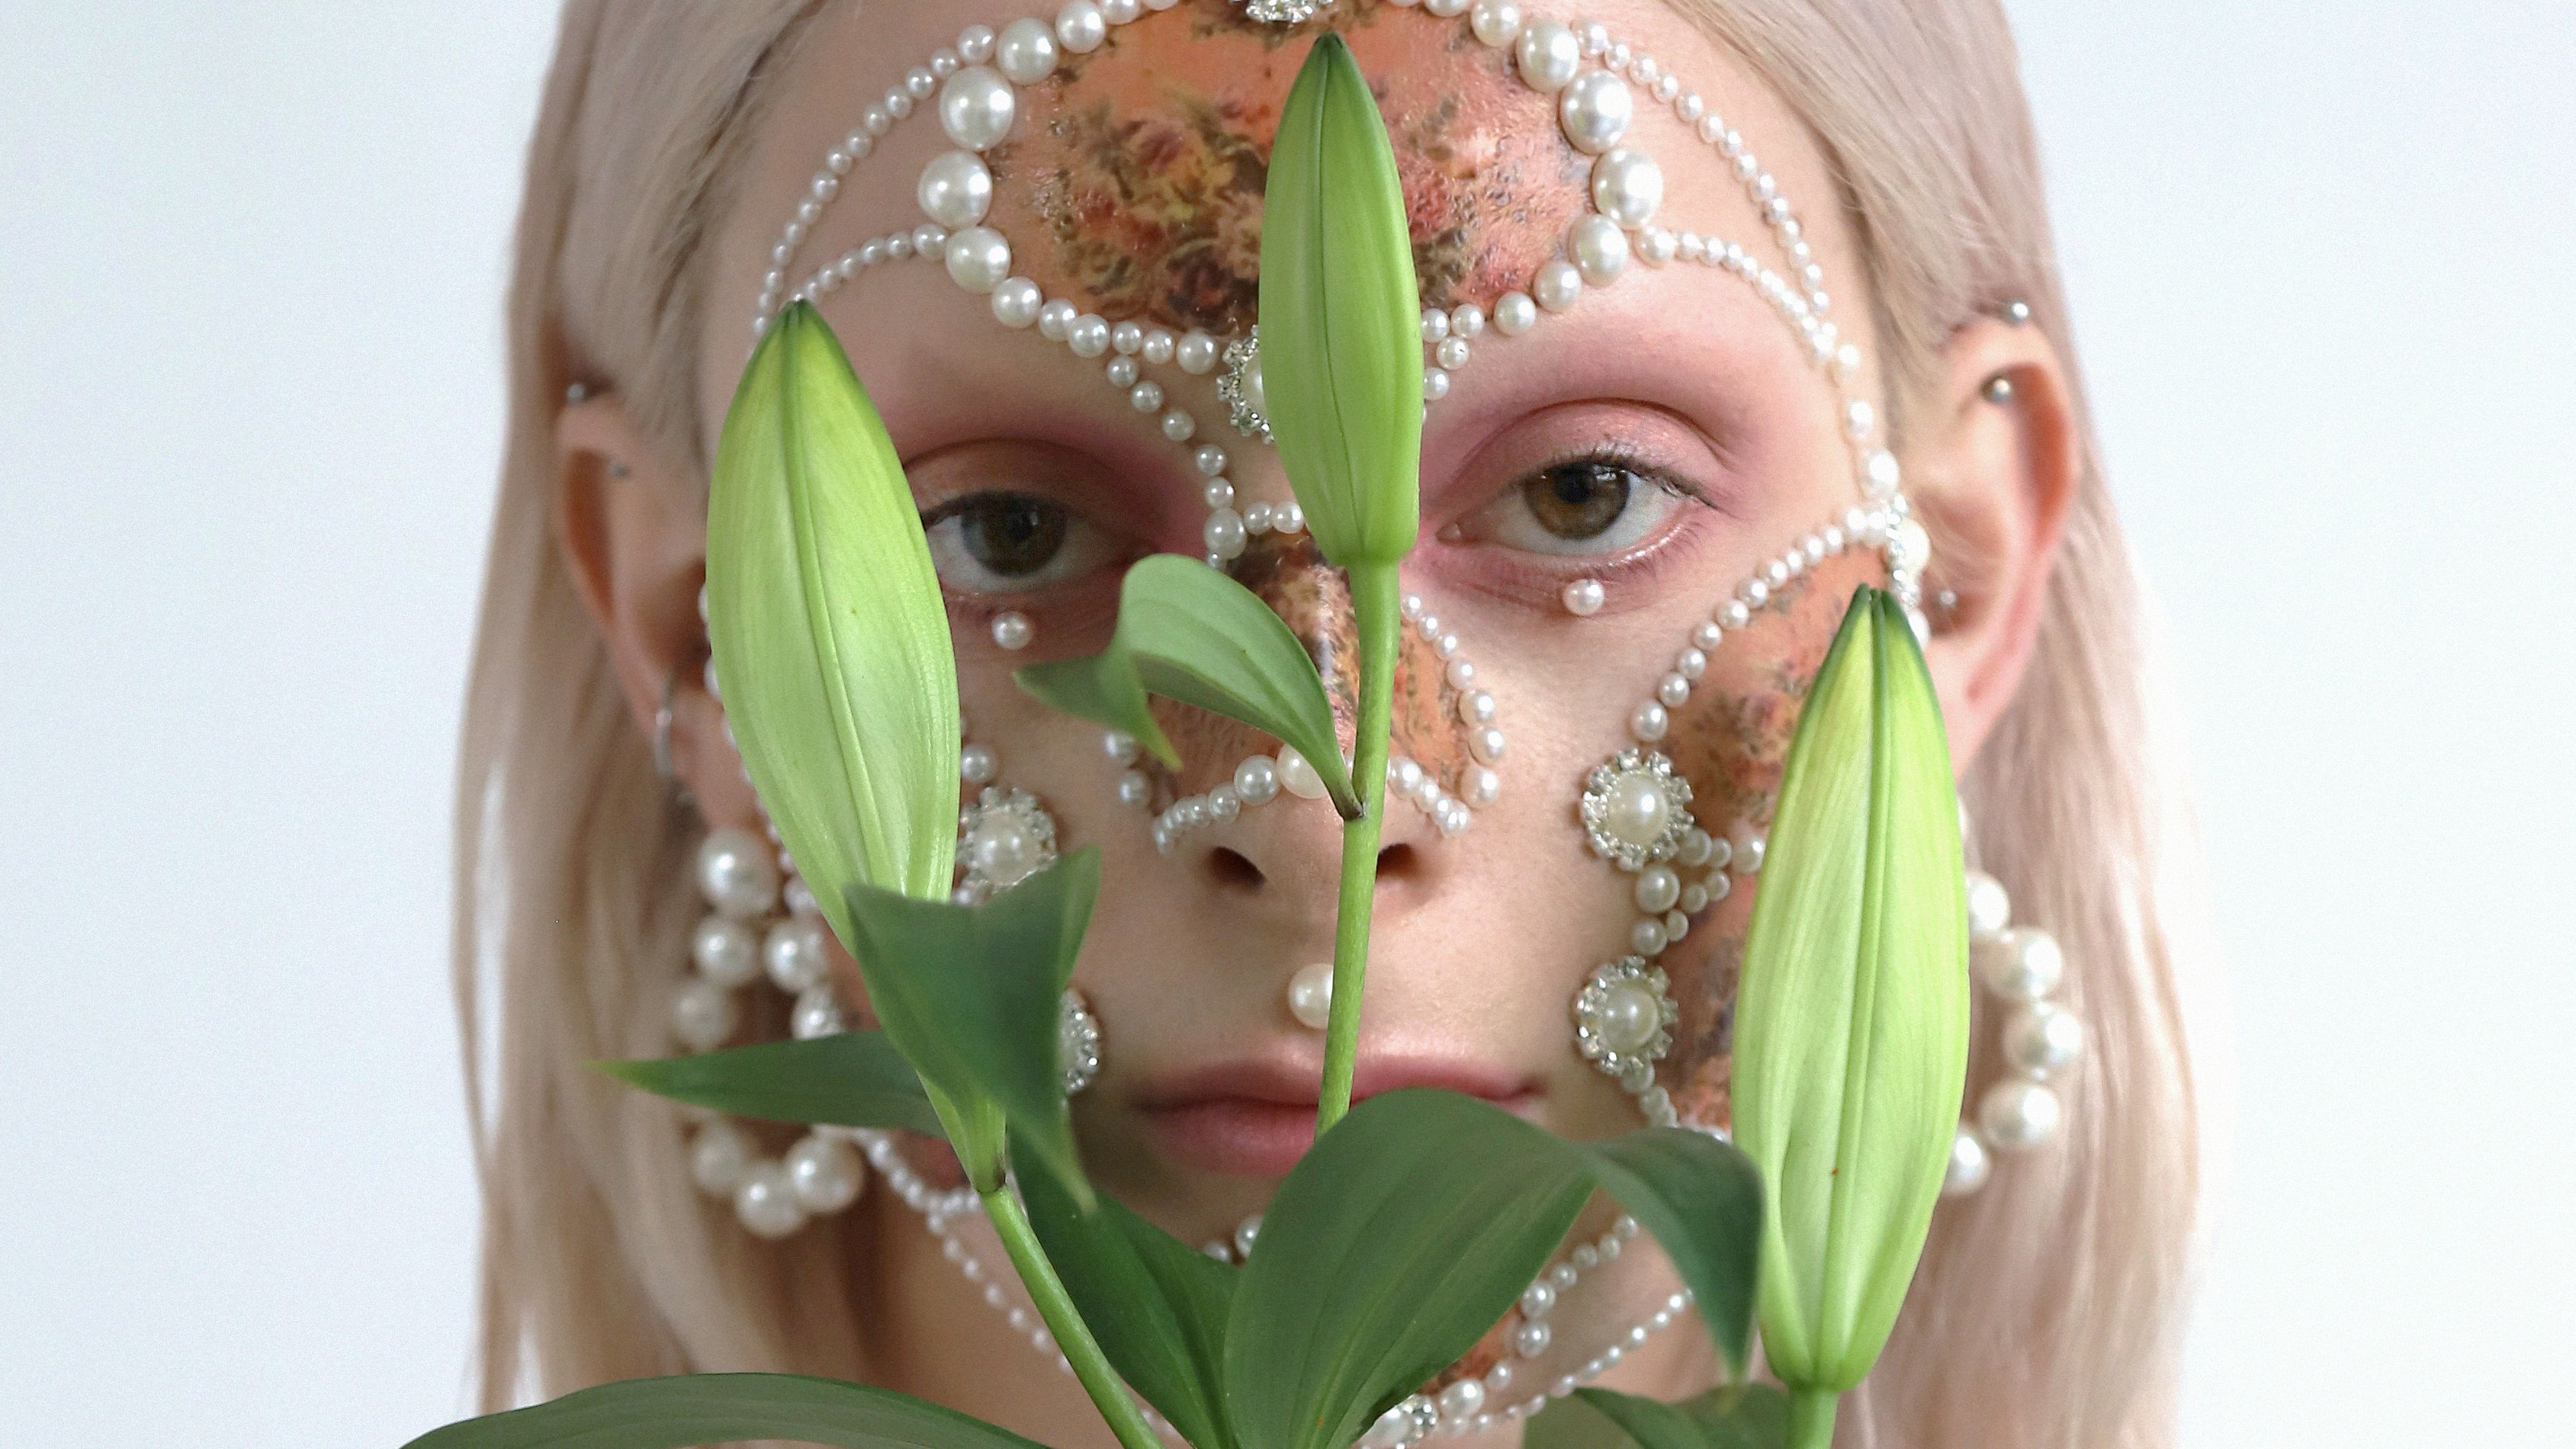 Female model with pearl facial jewellery, makeup and lilies.